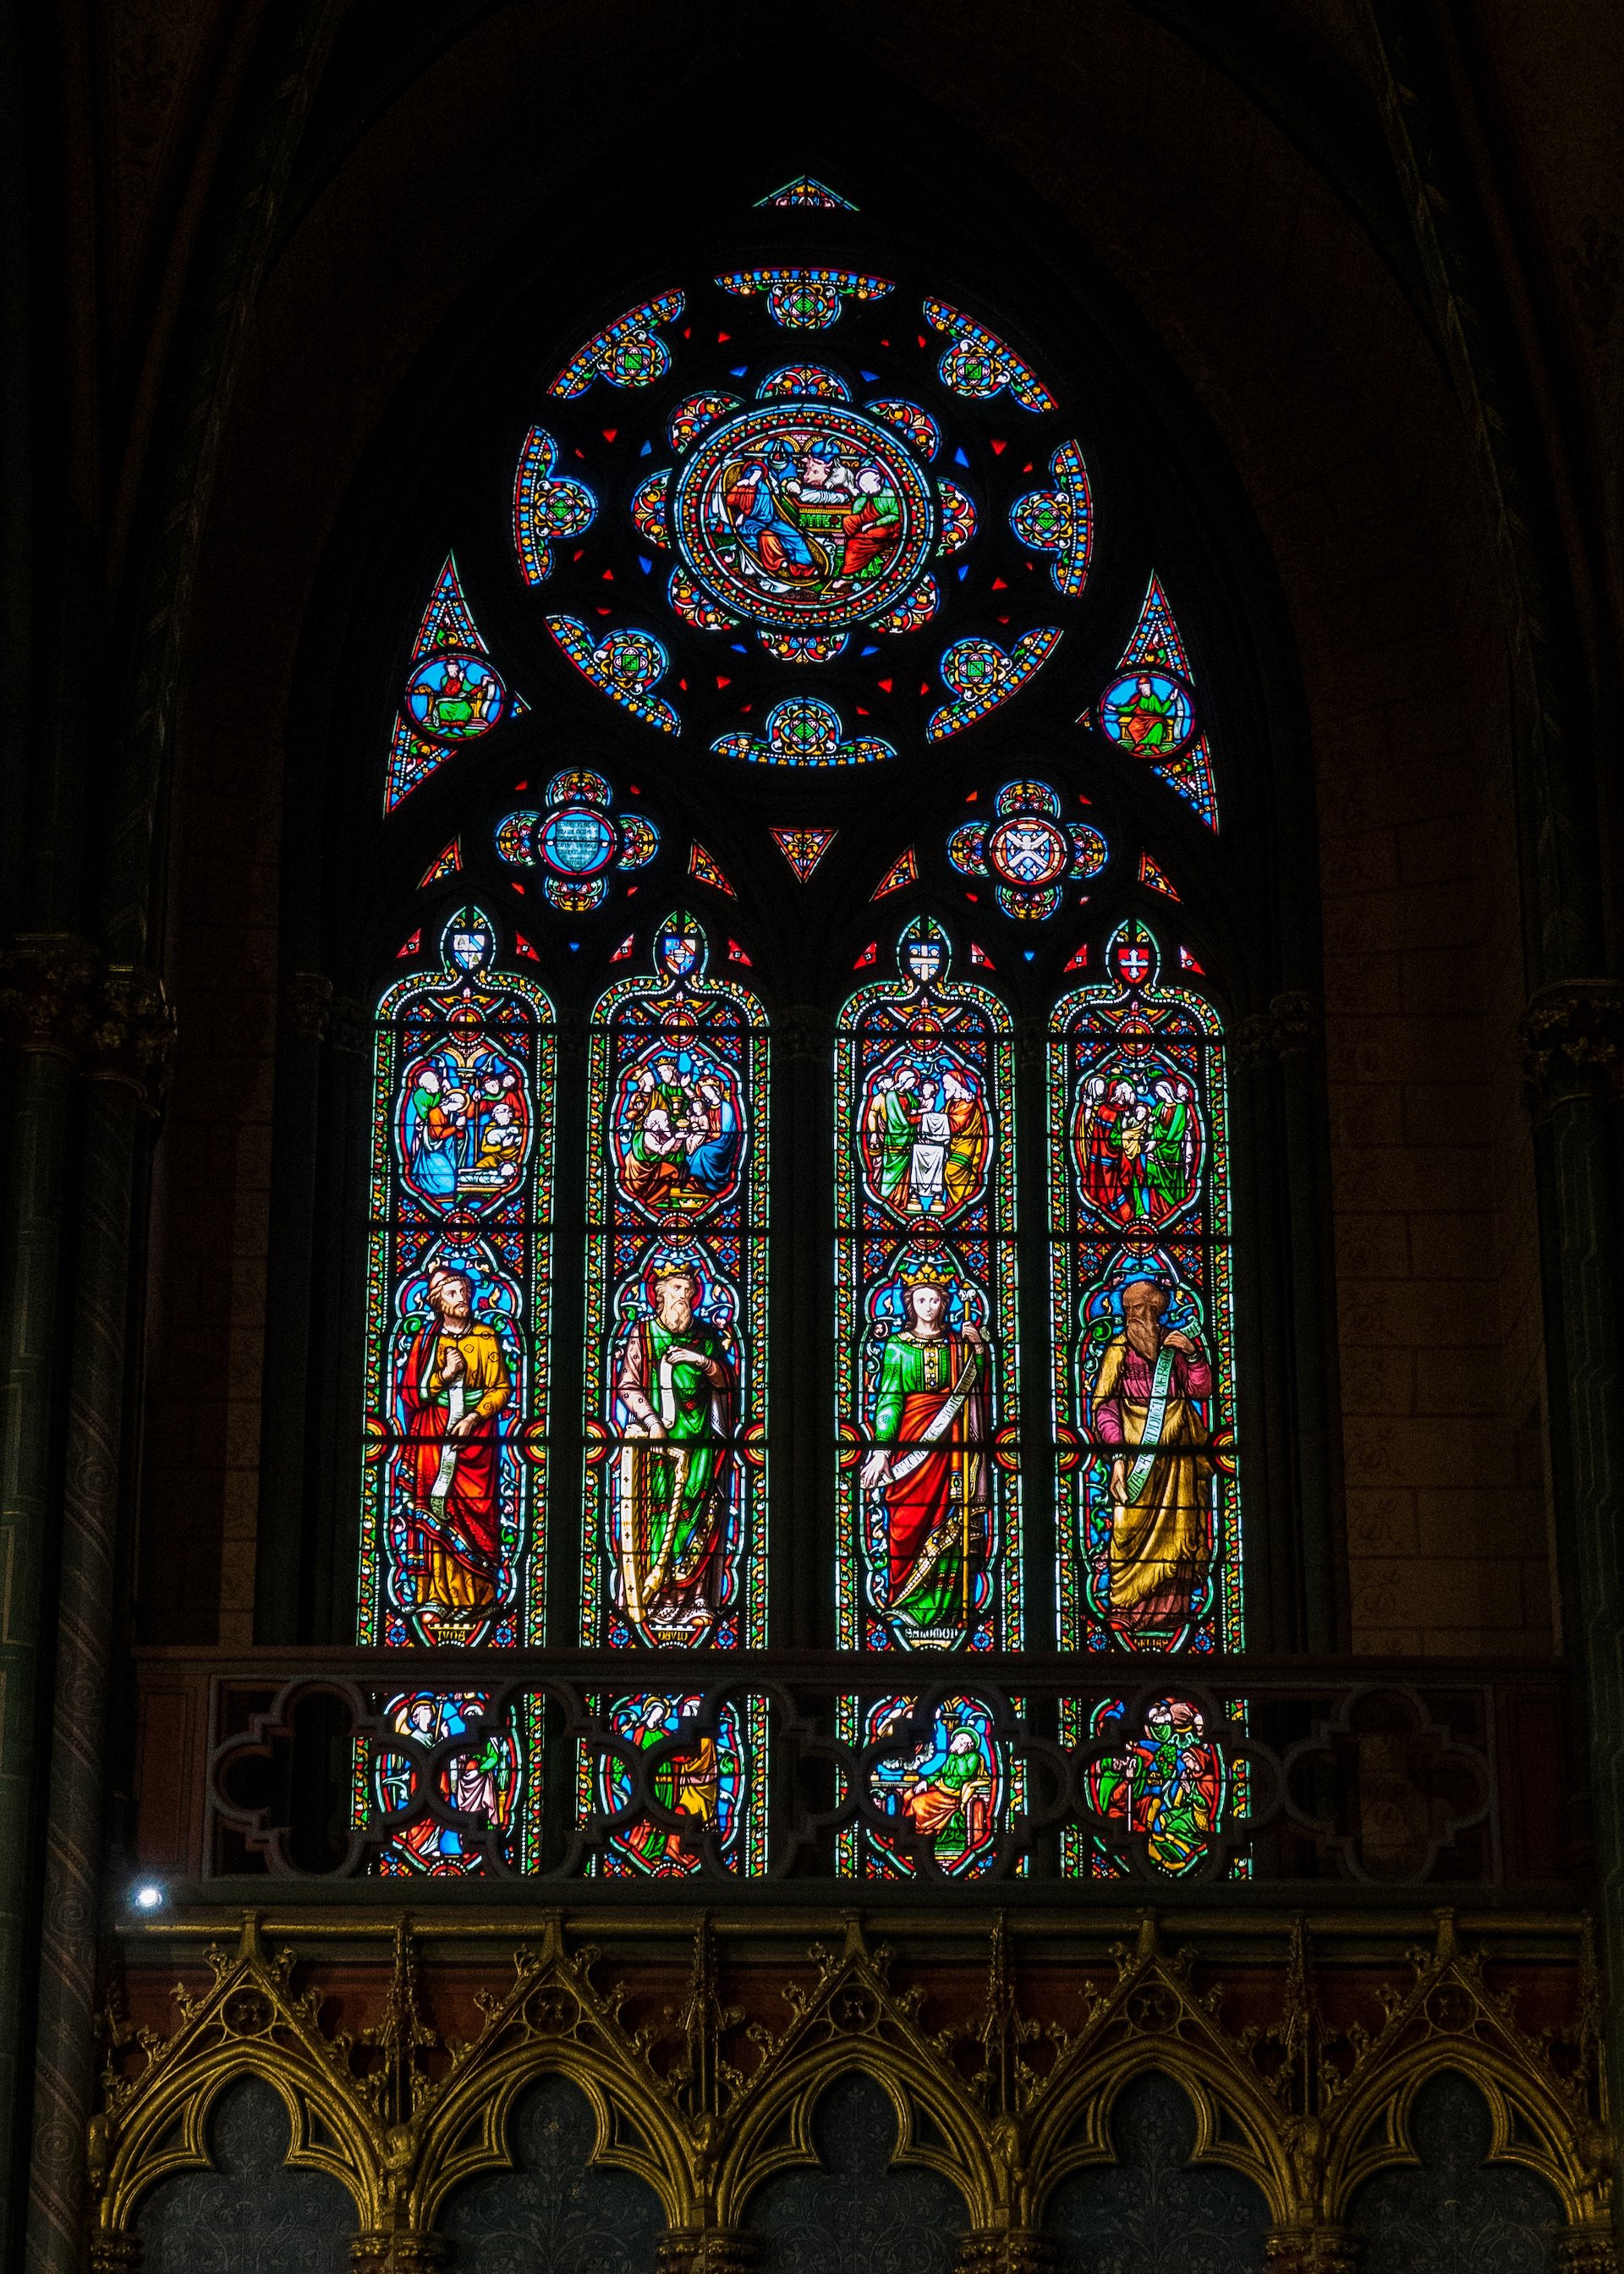  One of the stained glass windows inside the cathedral.  